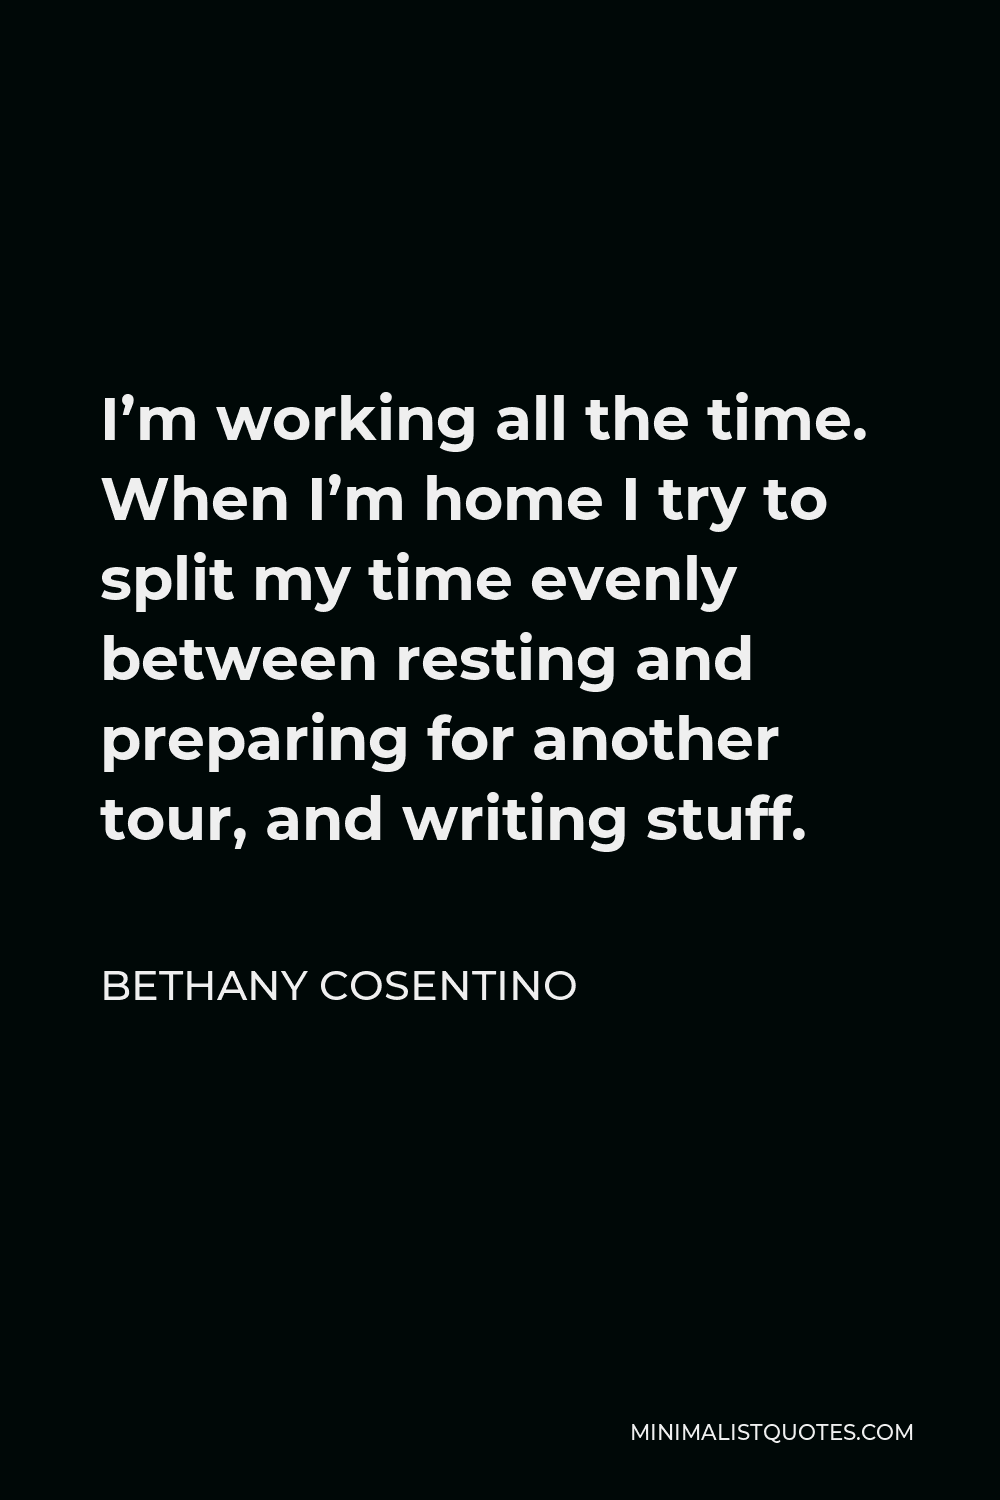 Bethany Cosentino Quote - I’m working all the time. When I’m home I try to split my time evenly between resting and preparing for another tour, and writing stuff.